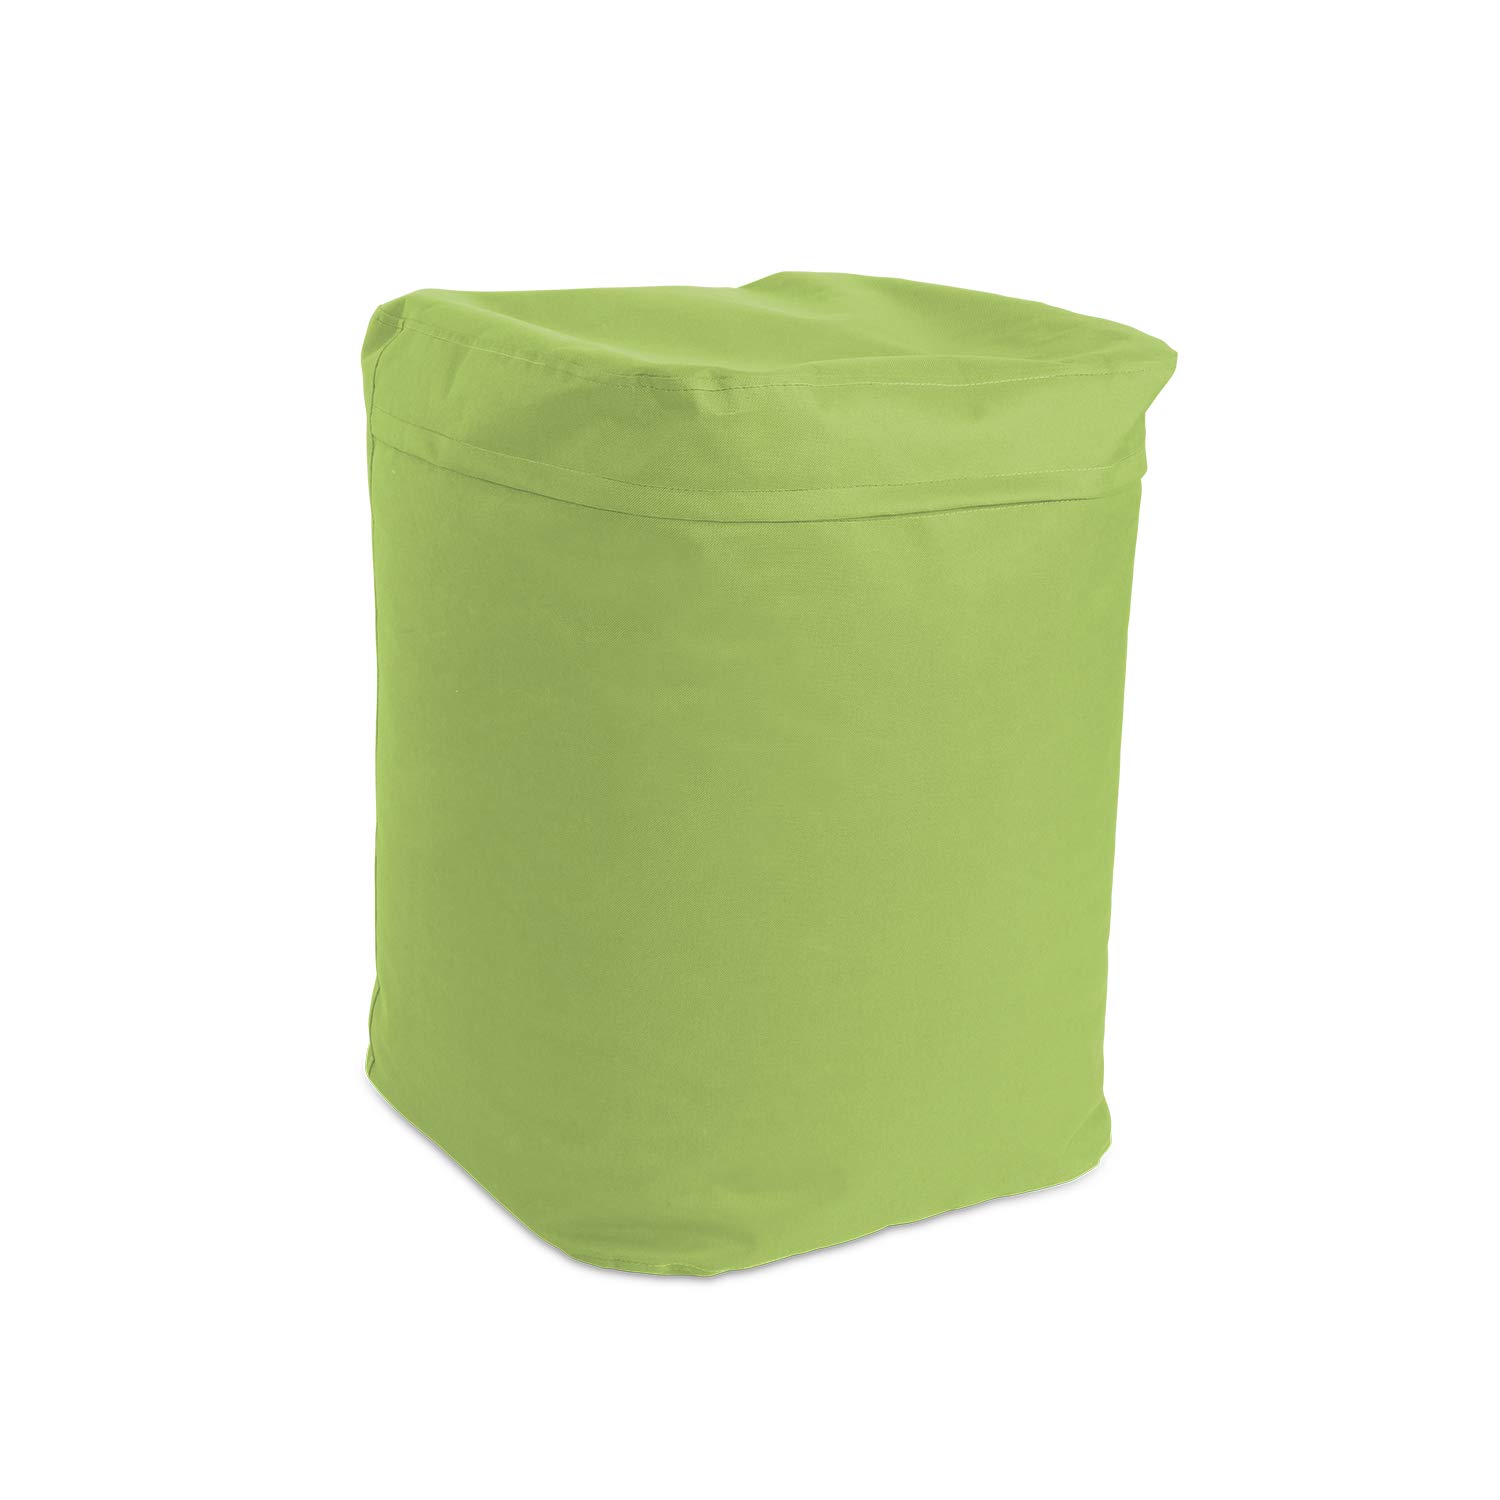 Knorr-Baby 440404 Stool Rectangular L Colour Green